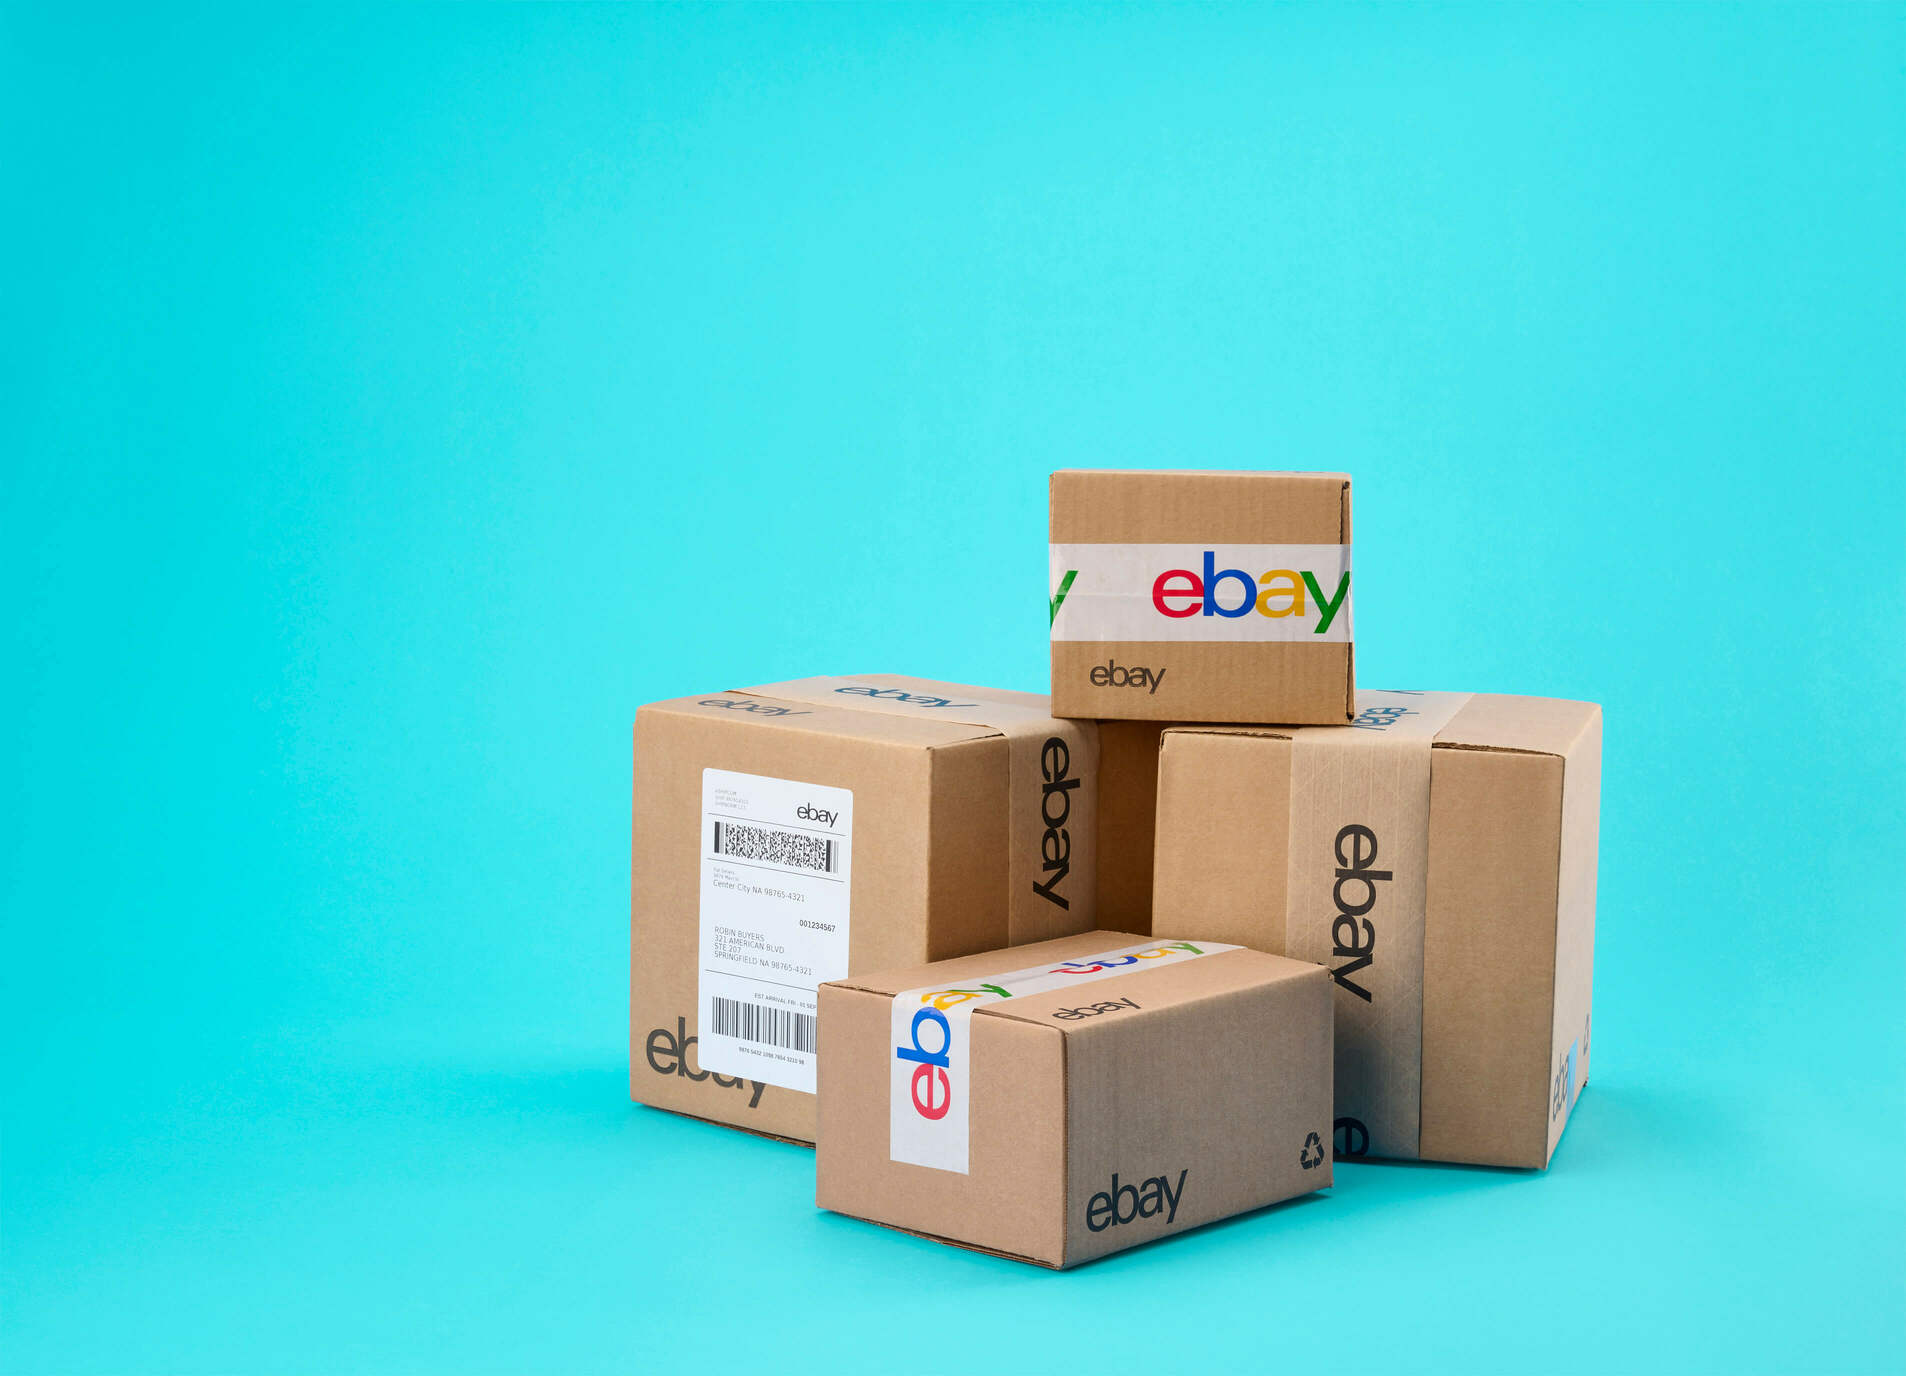 pile of boxes with eBay packaging against a blue background